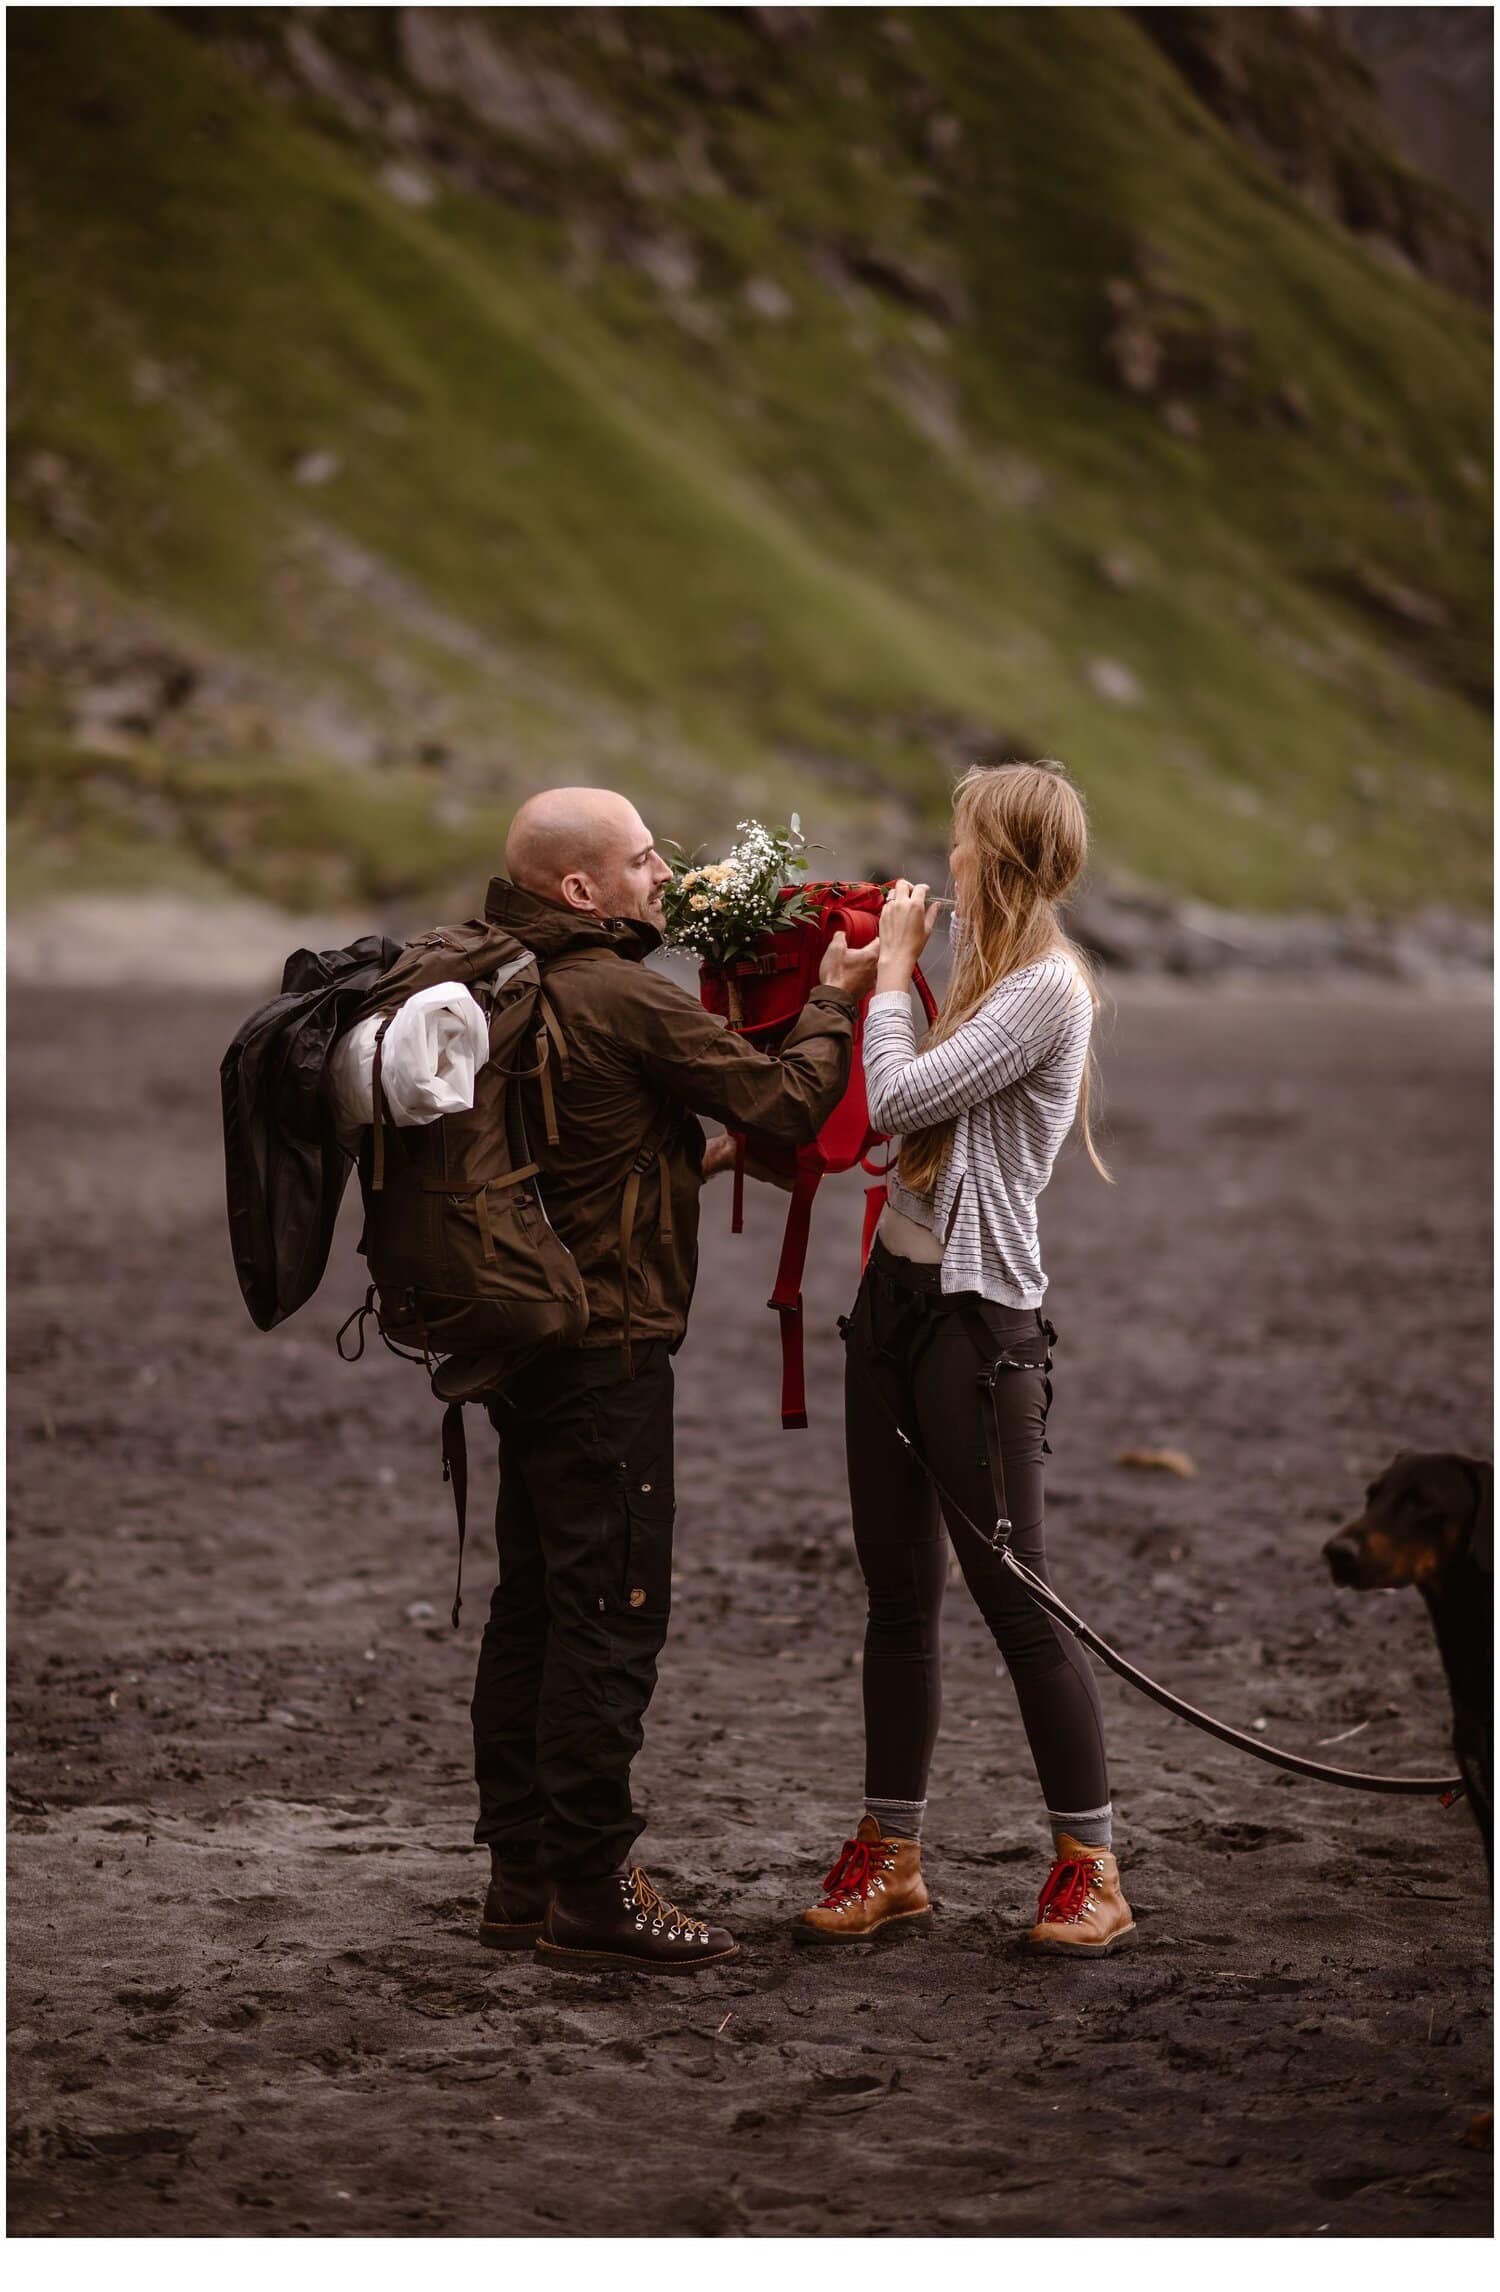 Groom is helping the bride take off her backpack on a beach in Norway.